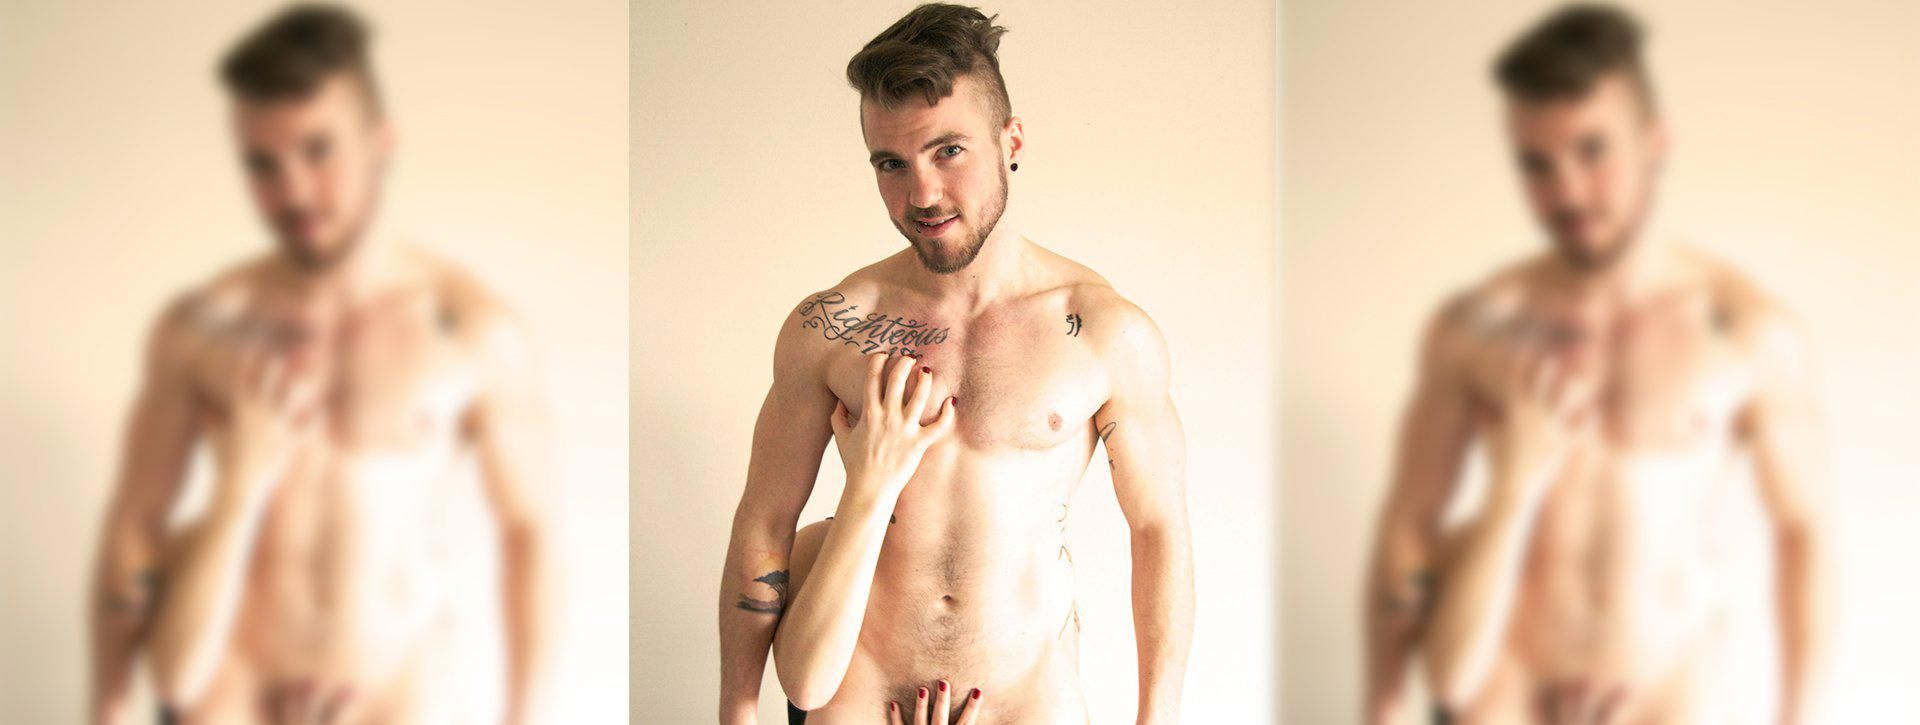 ben wooding recommends adam levine nudes pic